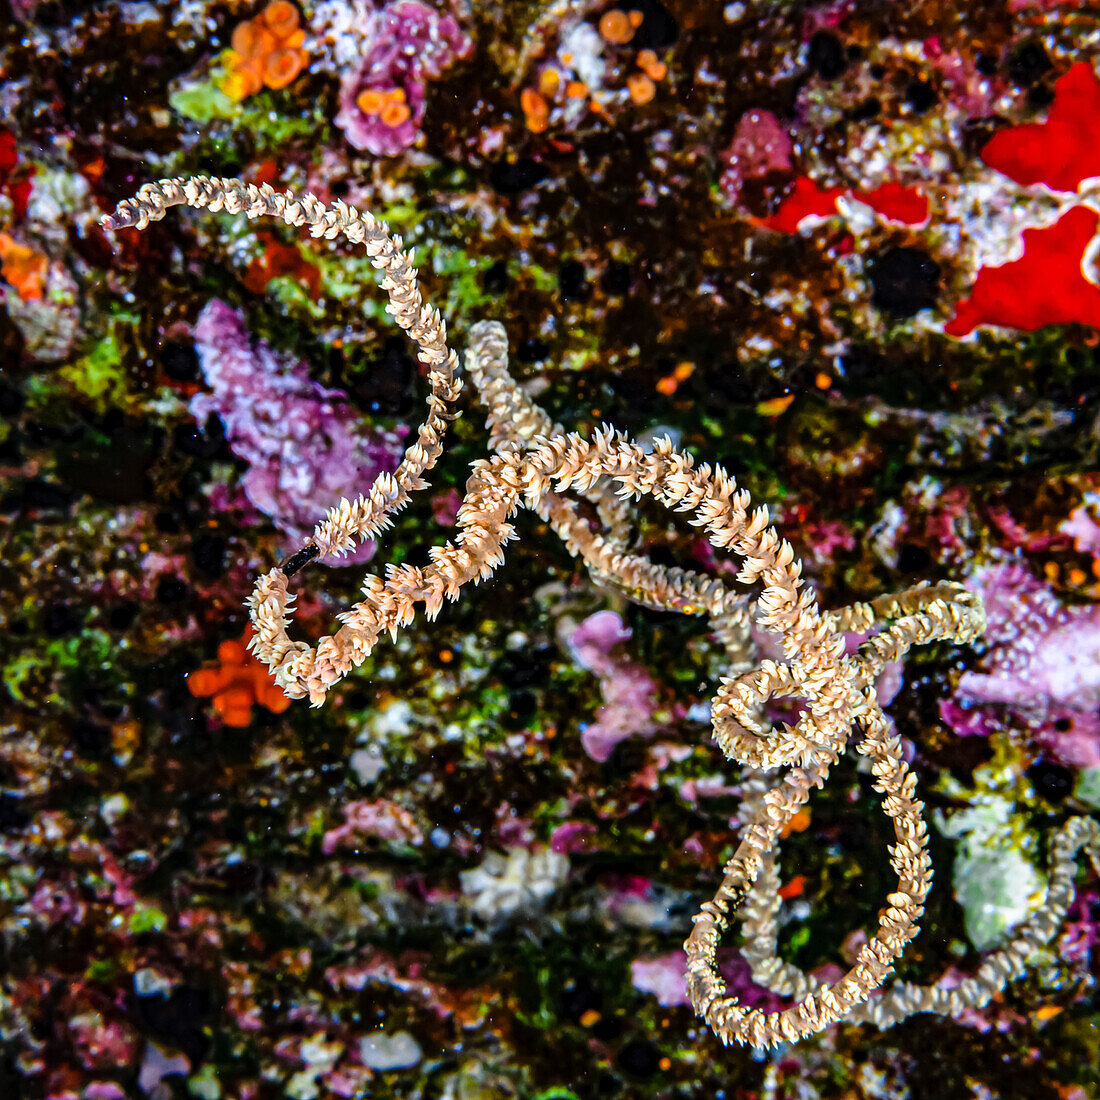 Spiral Wire Coral (Cirrhipathes spiralis) living on the backwall of Molokini Crater, offshore of Maui; Molokini Crater, Maui, Hawaii, United States of America